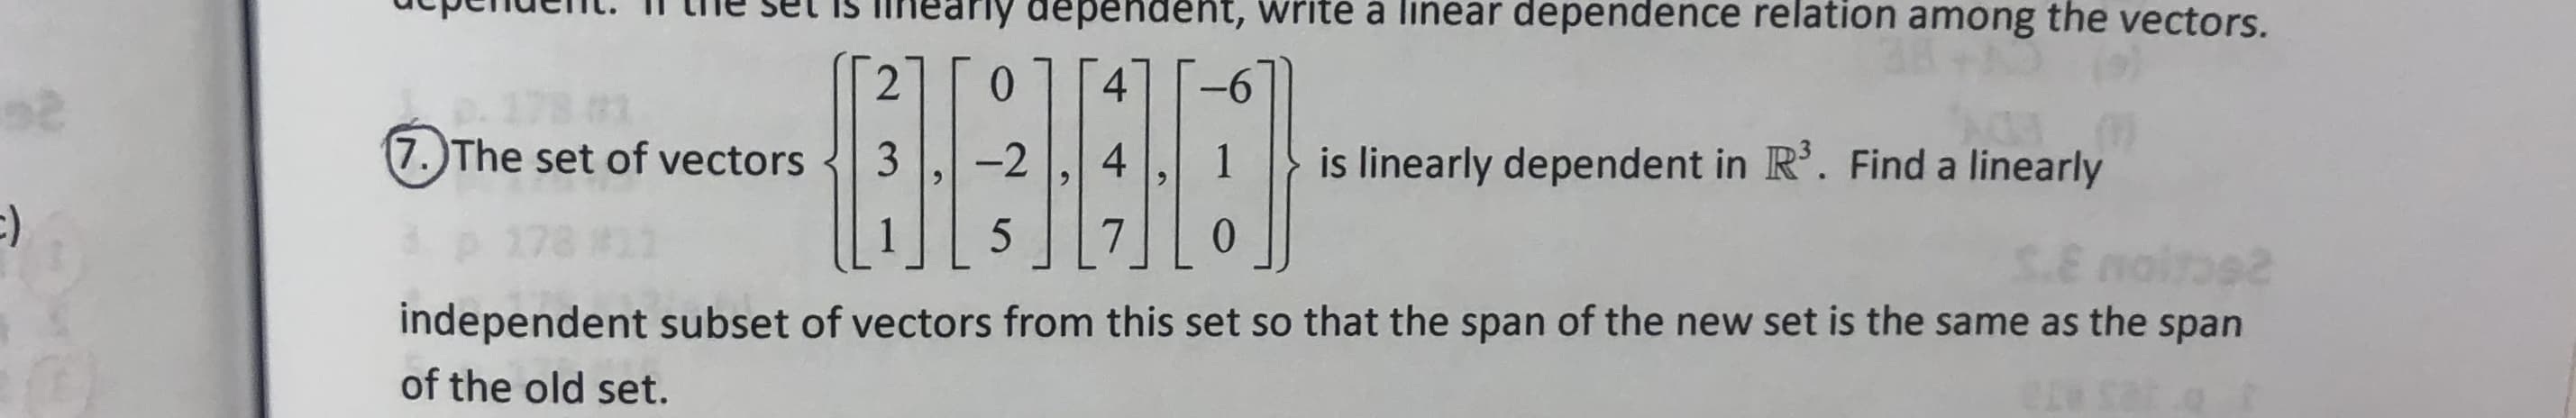 he set is iheariy dependent, write a linear dependence relation among the vectors.
2
0
4
(7.)The set of vectors
3
-2
4
is linearly dependent in R'. Find a linearly
1
5
0
$.8
independent subset of vectors from this set so that the span of the new set is the same as the span
of the old set.
